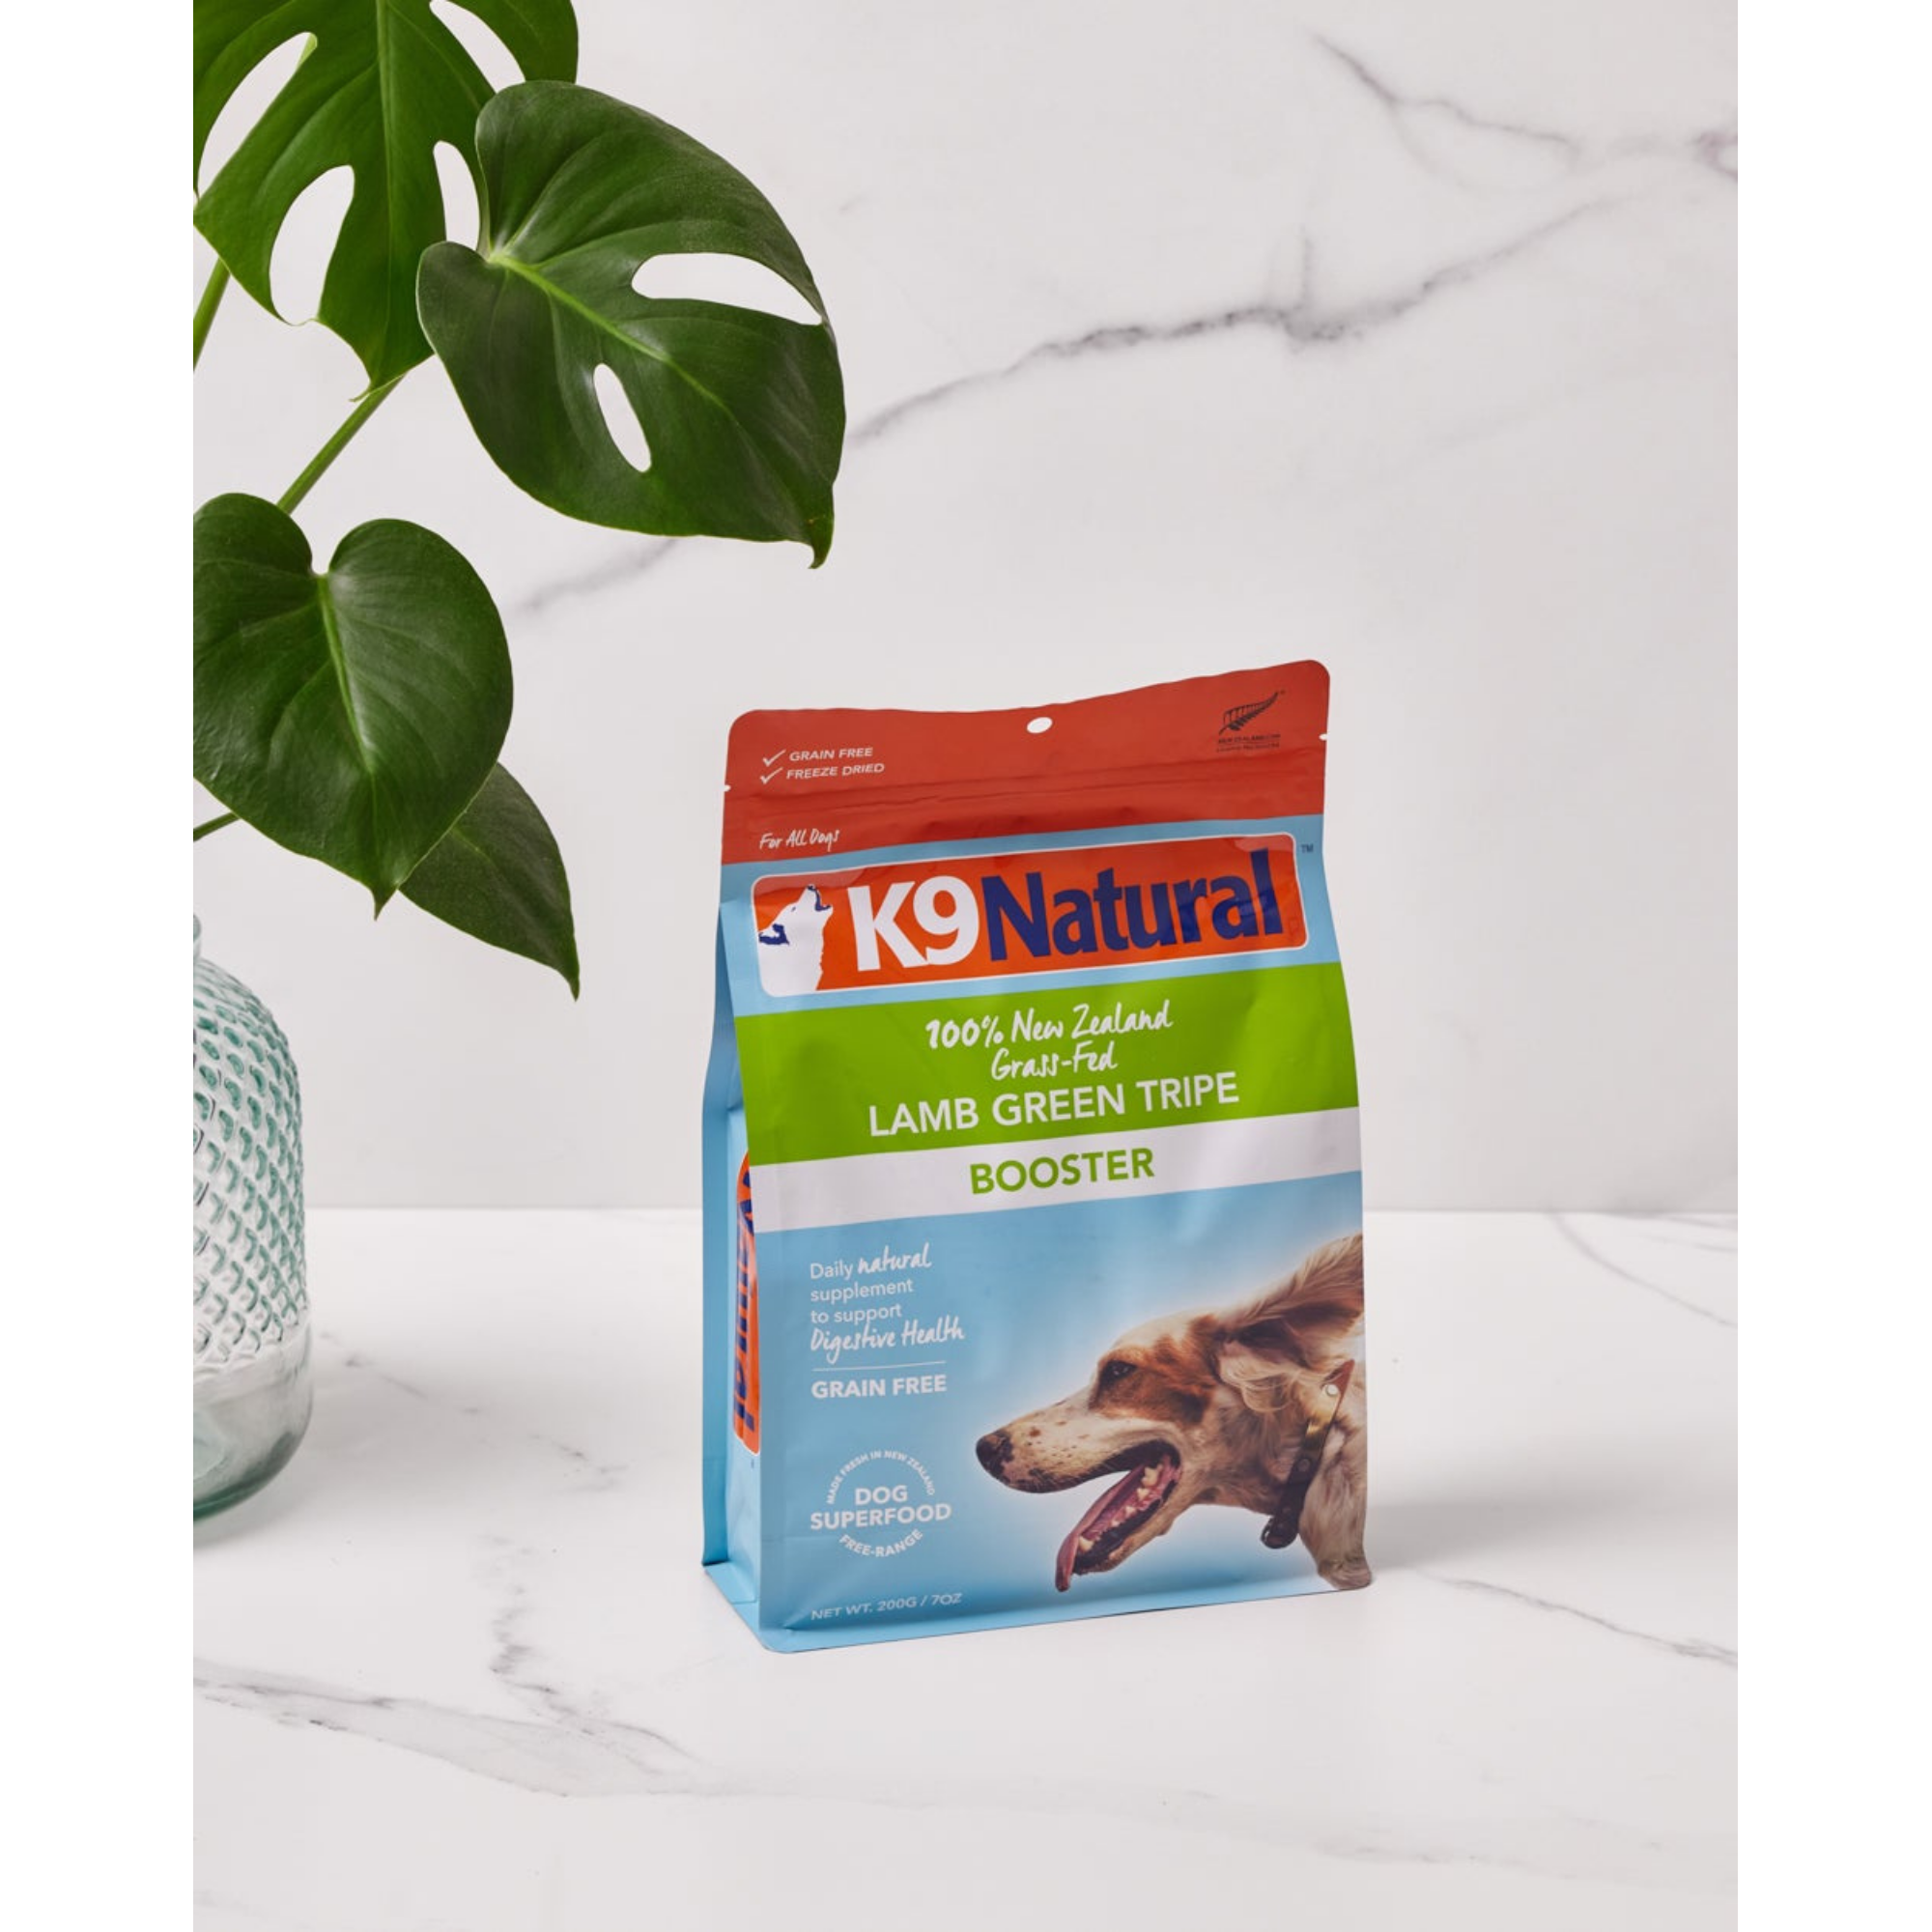 K9 Natural Dog Freeze-Dried Lamb Green Tripe Booster 7 oz - Mutts & Co.